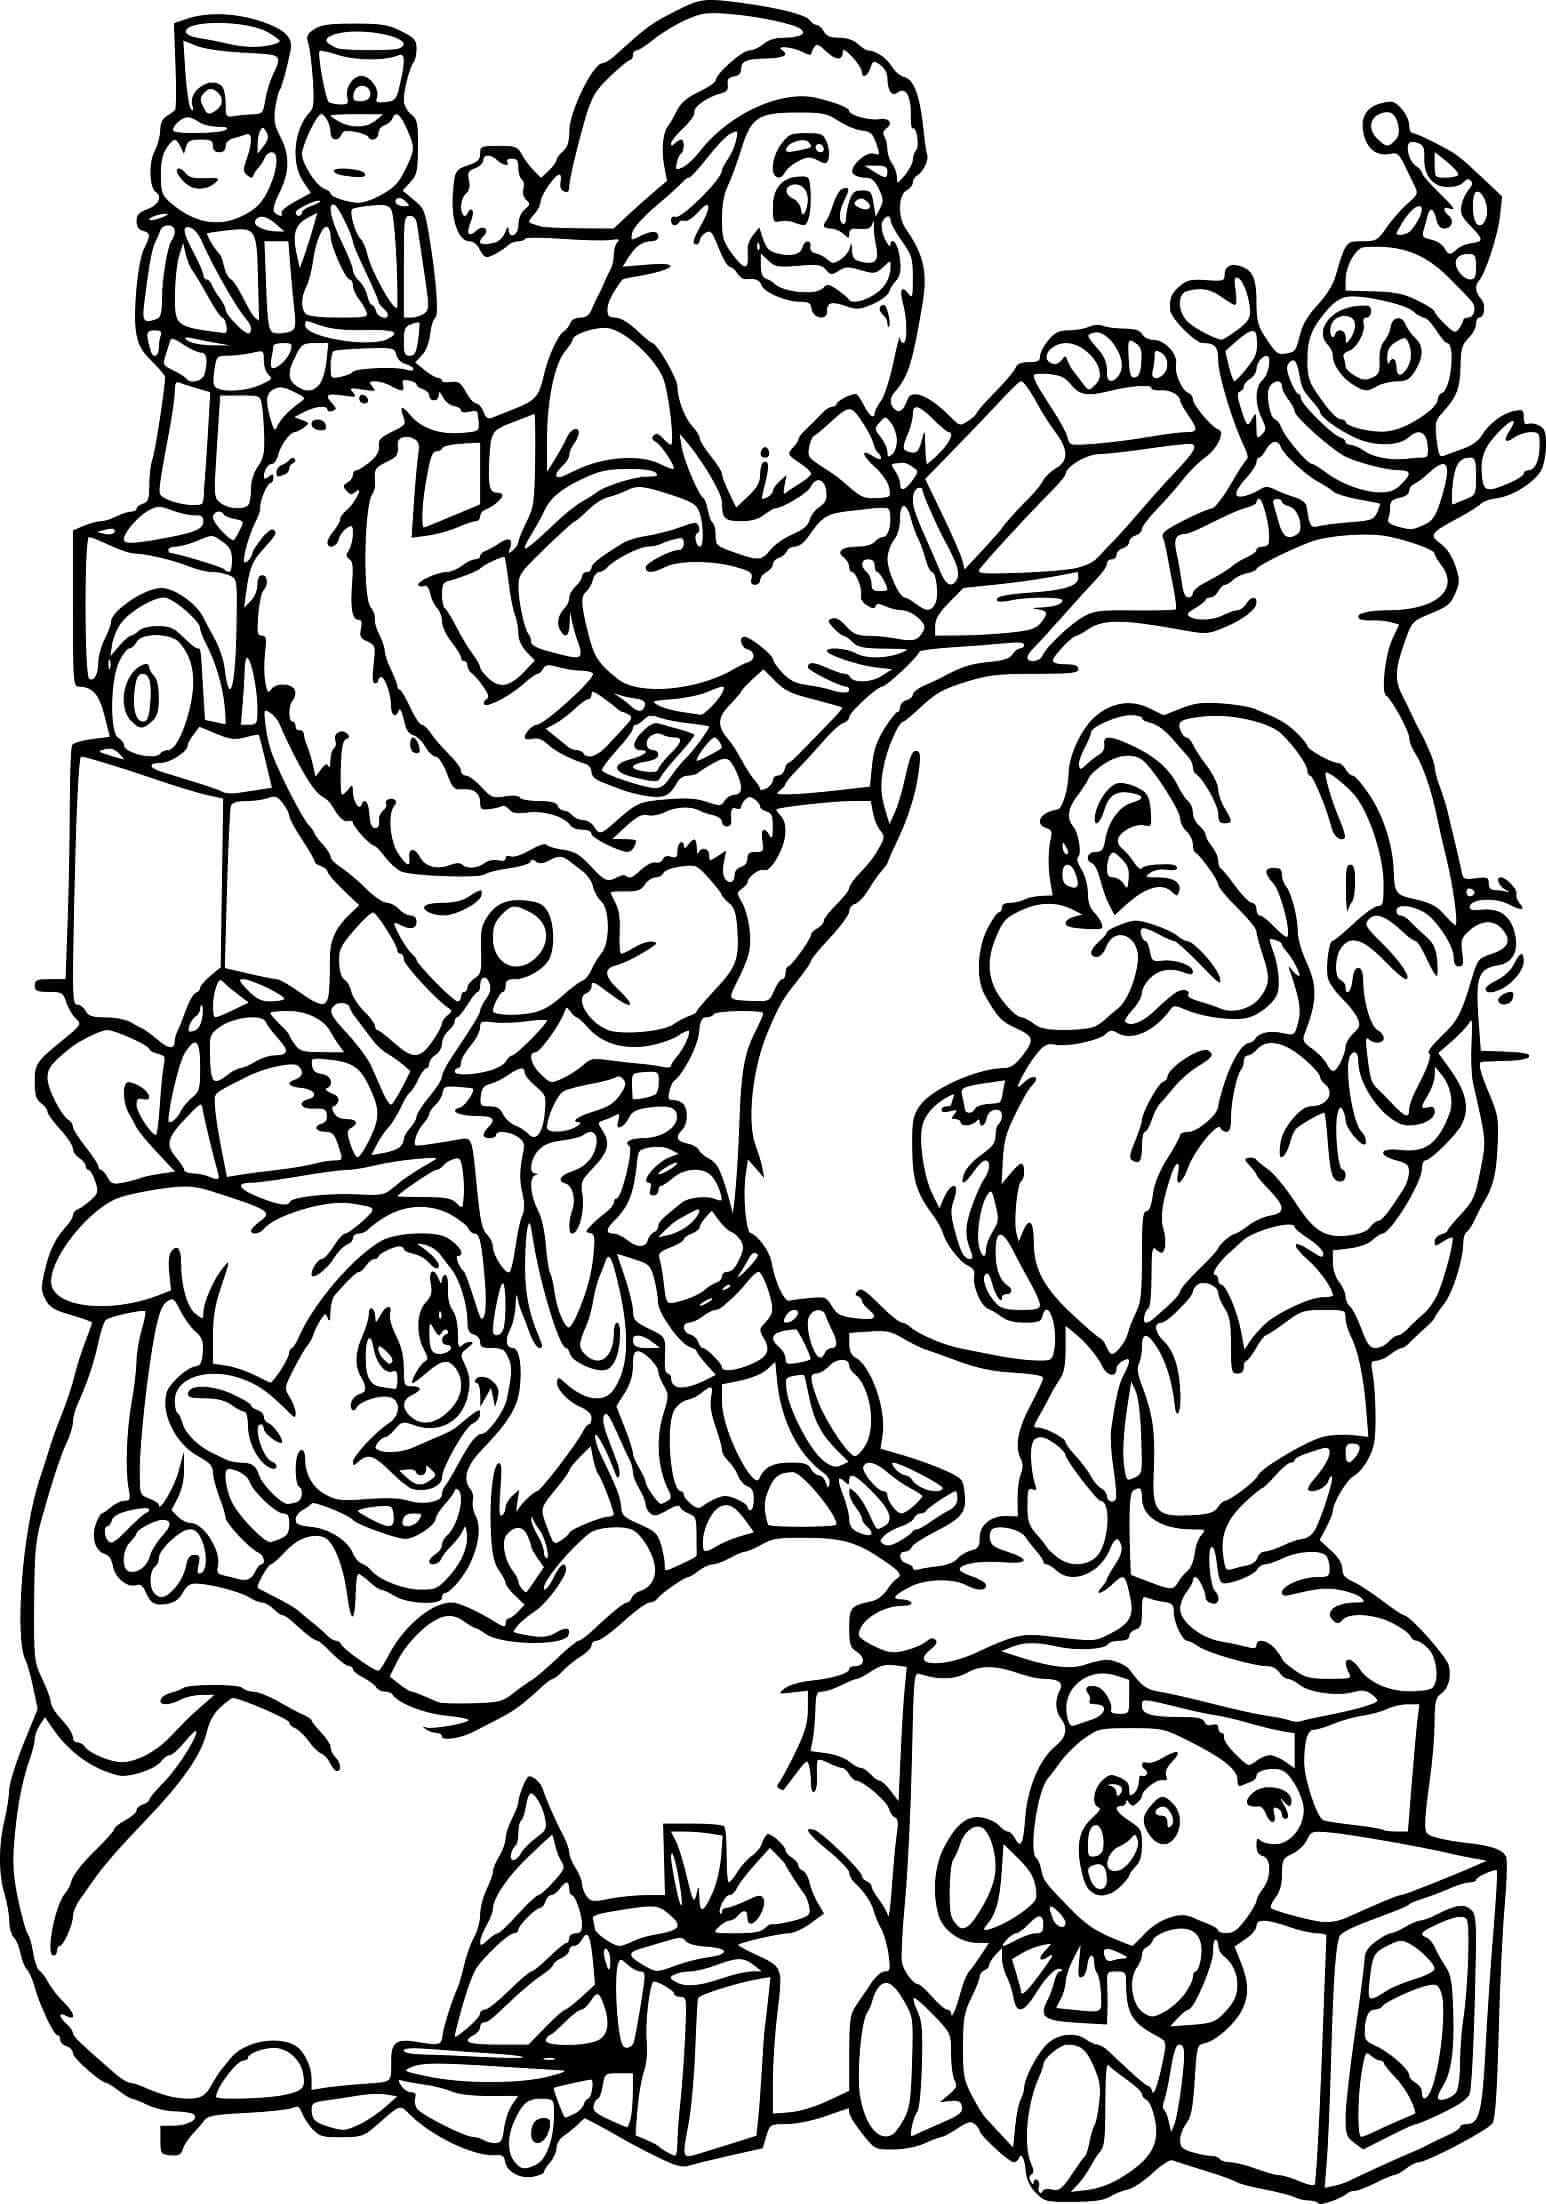 Dwarfs Help Santa Claus Collect Gifts Coloring Page